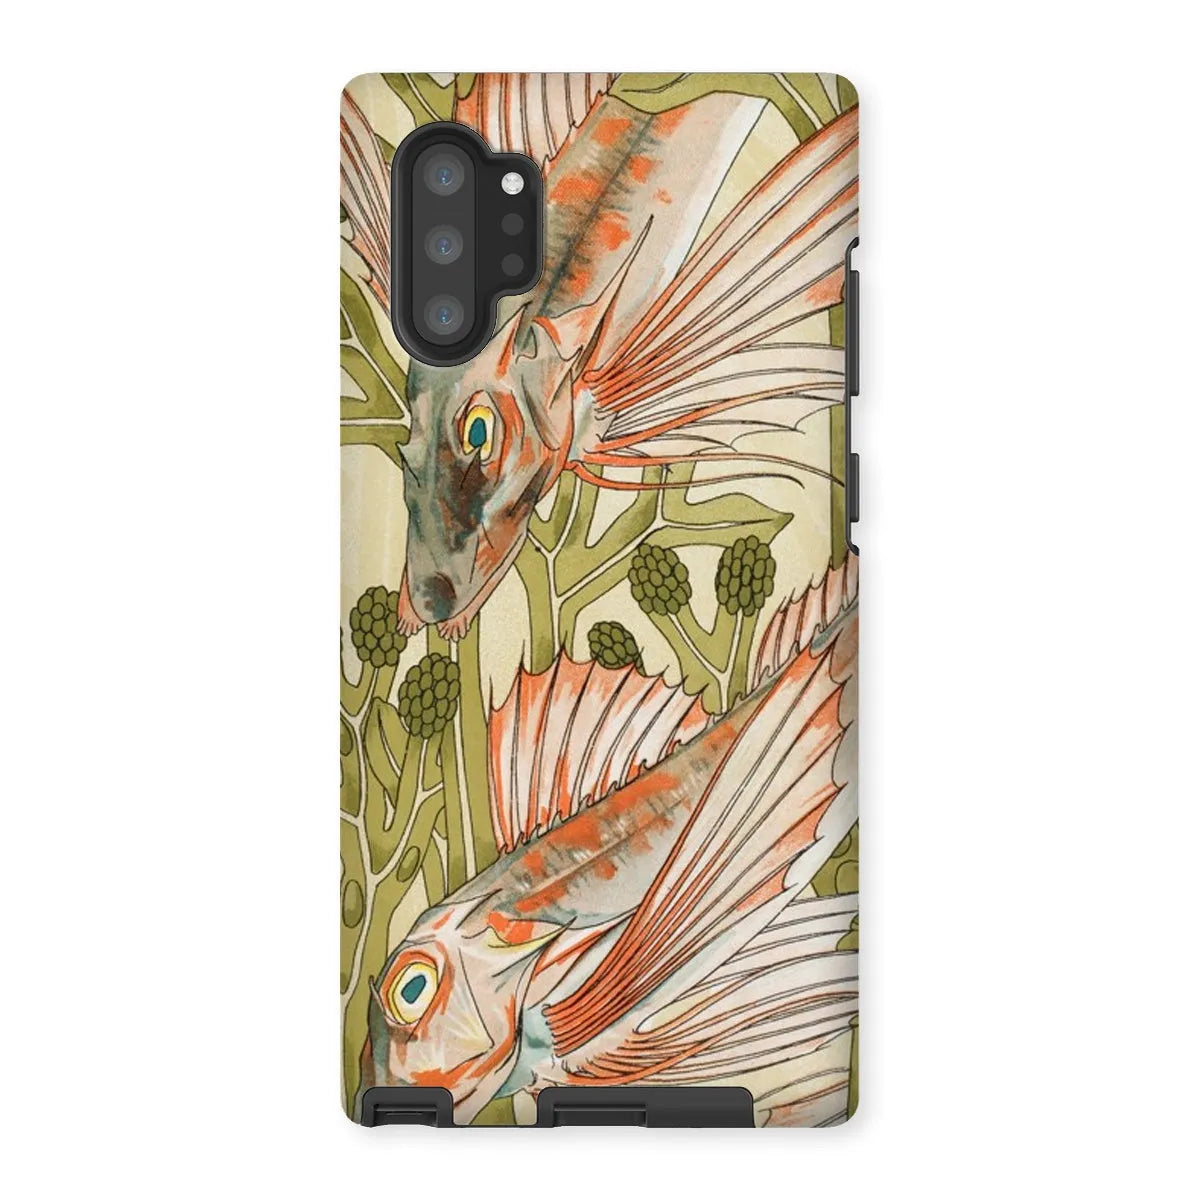 Red Fish - Animal Art Phone Case - Maurice Pillard Verneuil - Samsung Galaxy Note 10p / Matte - Mobile Phone Cases